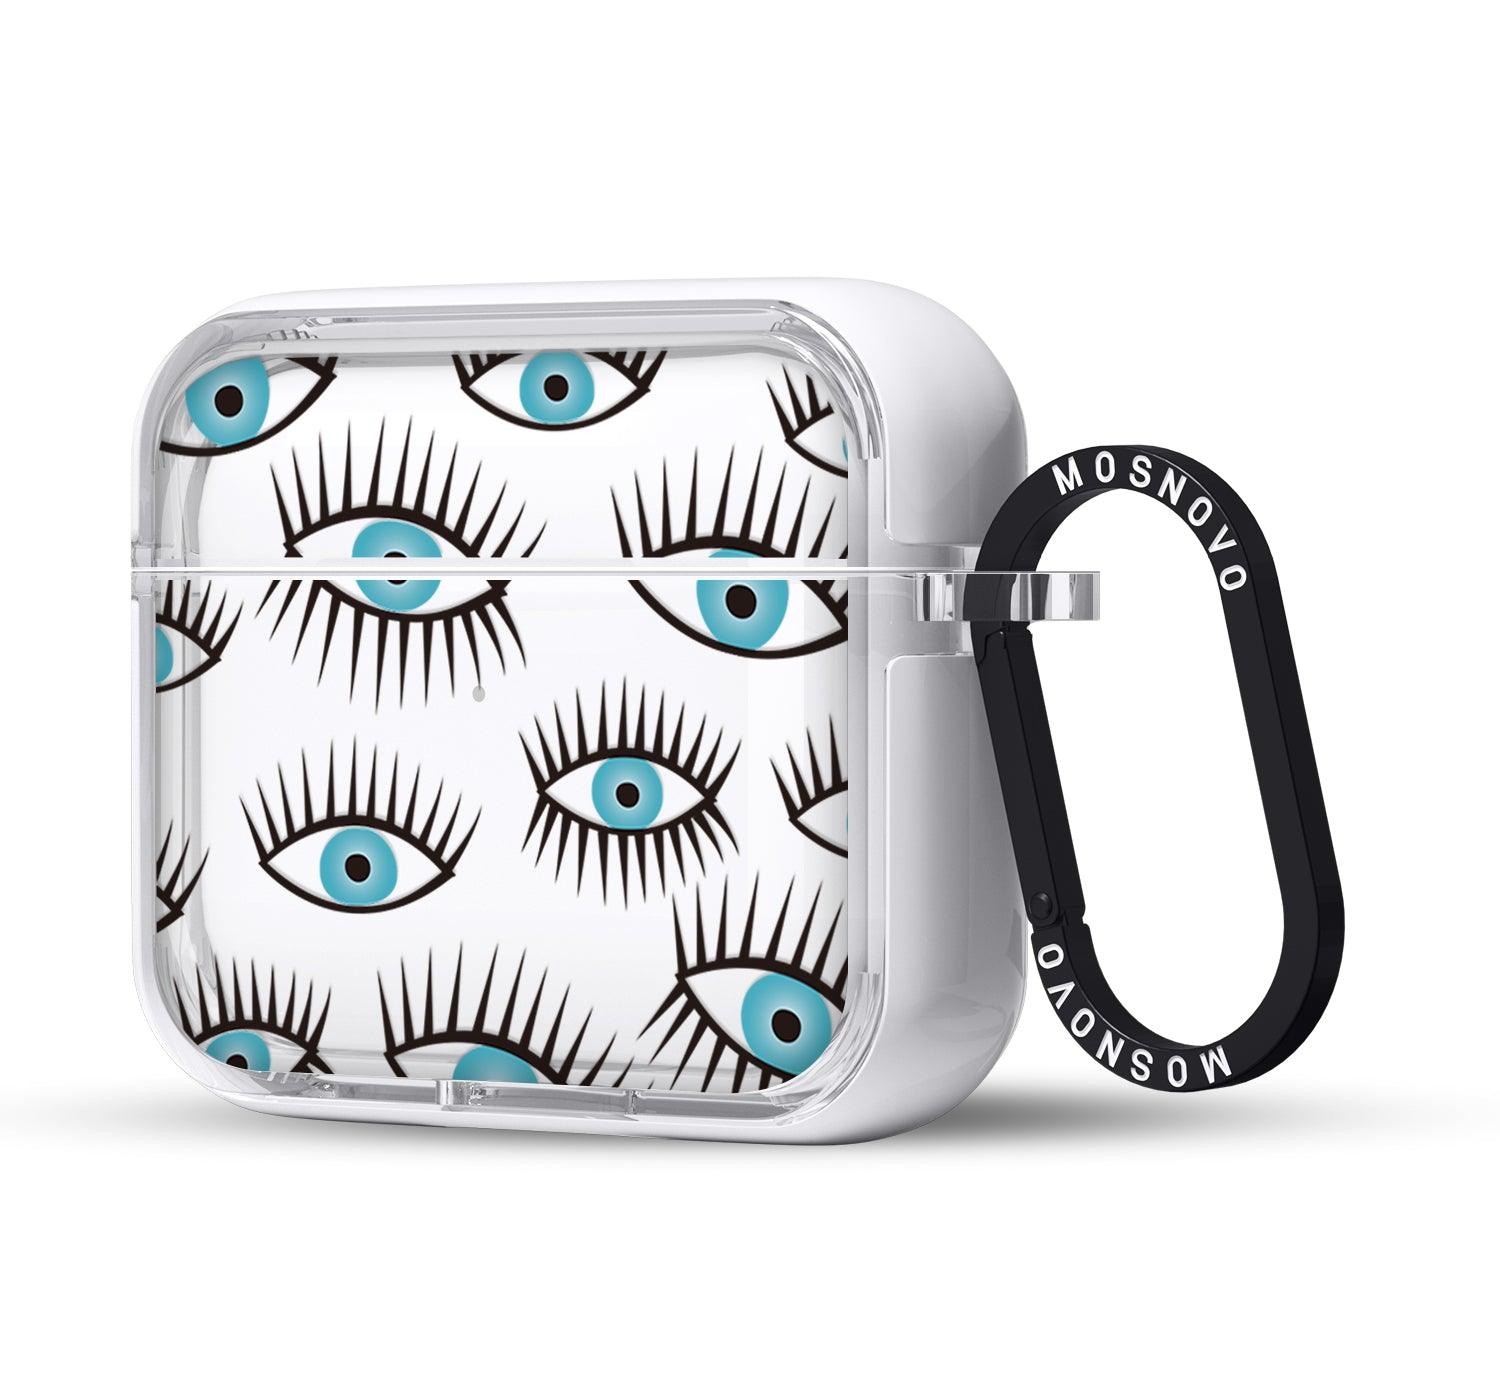 Evil Eyes AirPods 3 Case (3rd Generation) - MOSNOVO